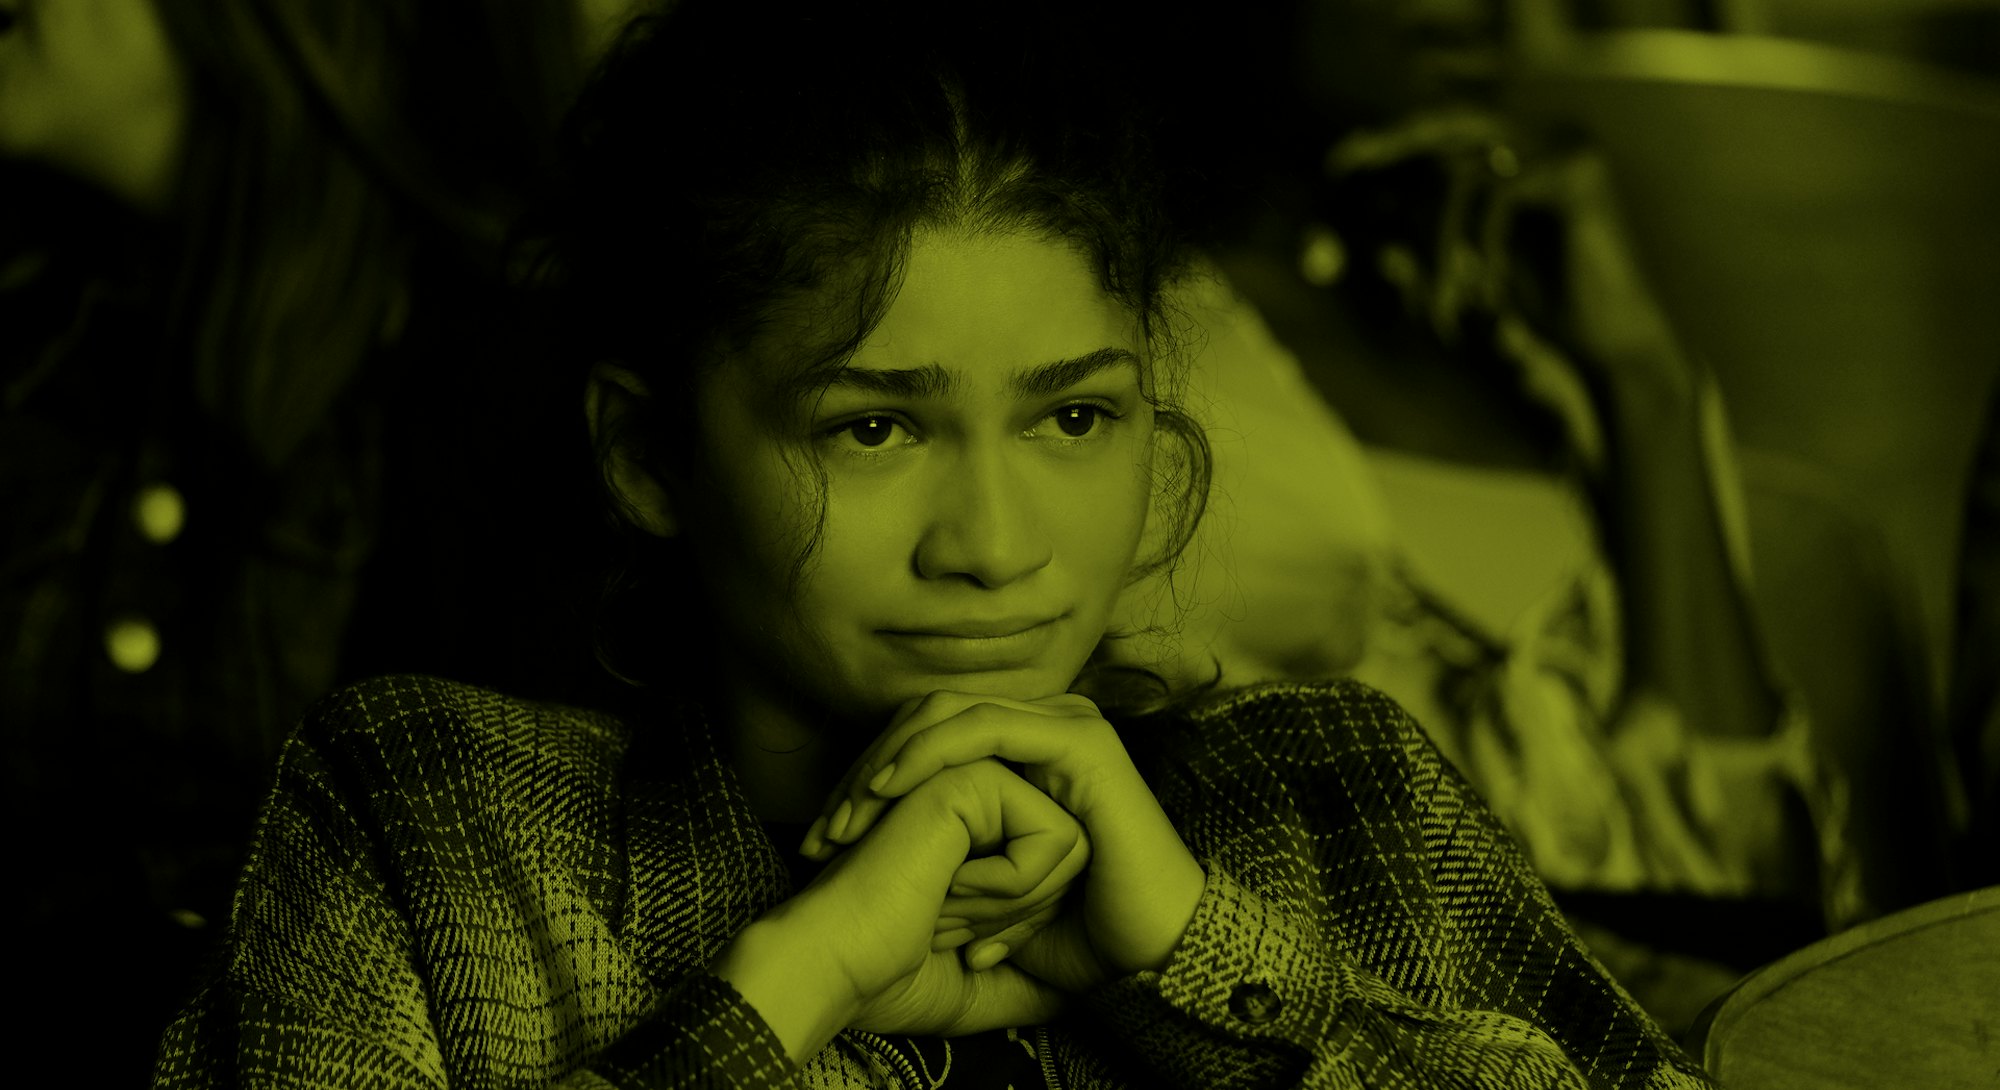 Zendaya, from "Euphoria", sitting down with hands under her chin, looking like she is close to tears...